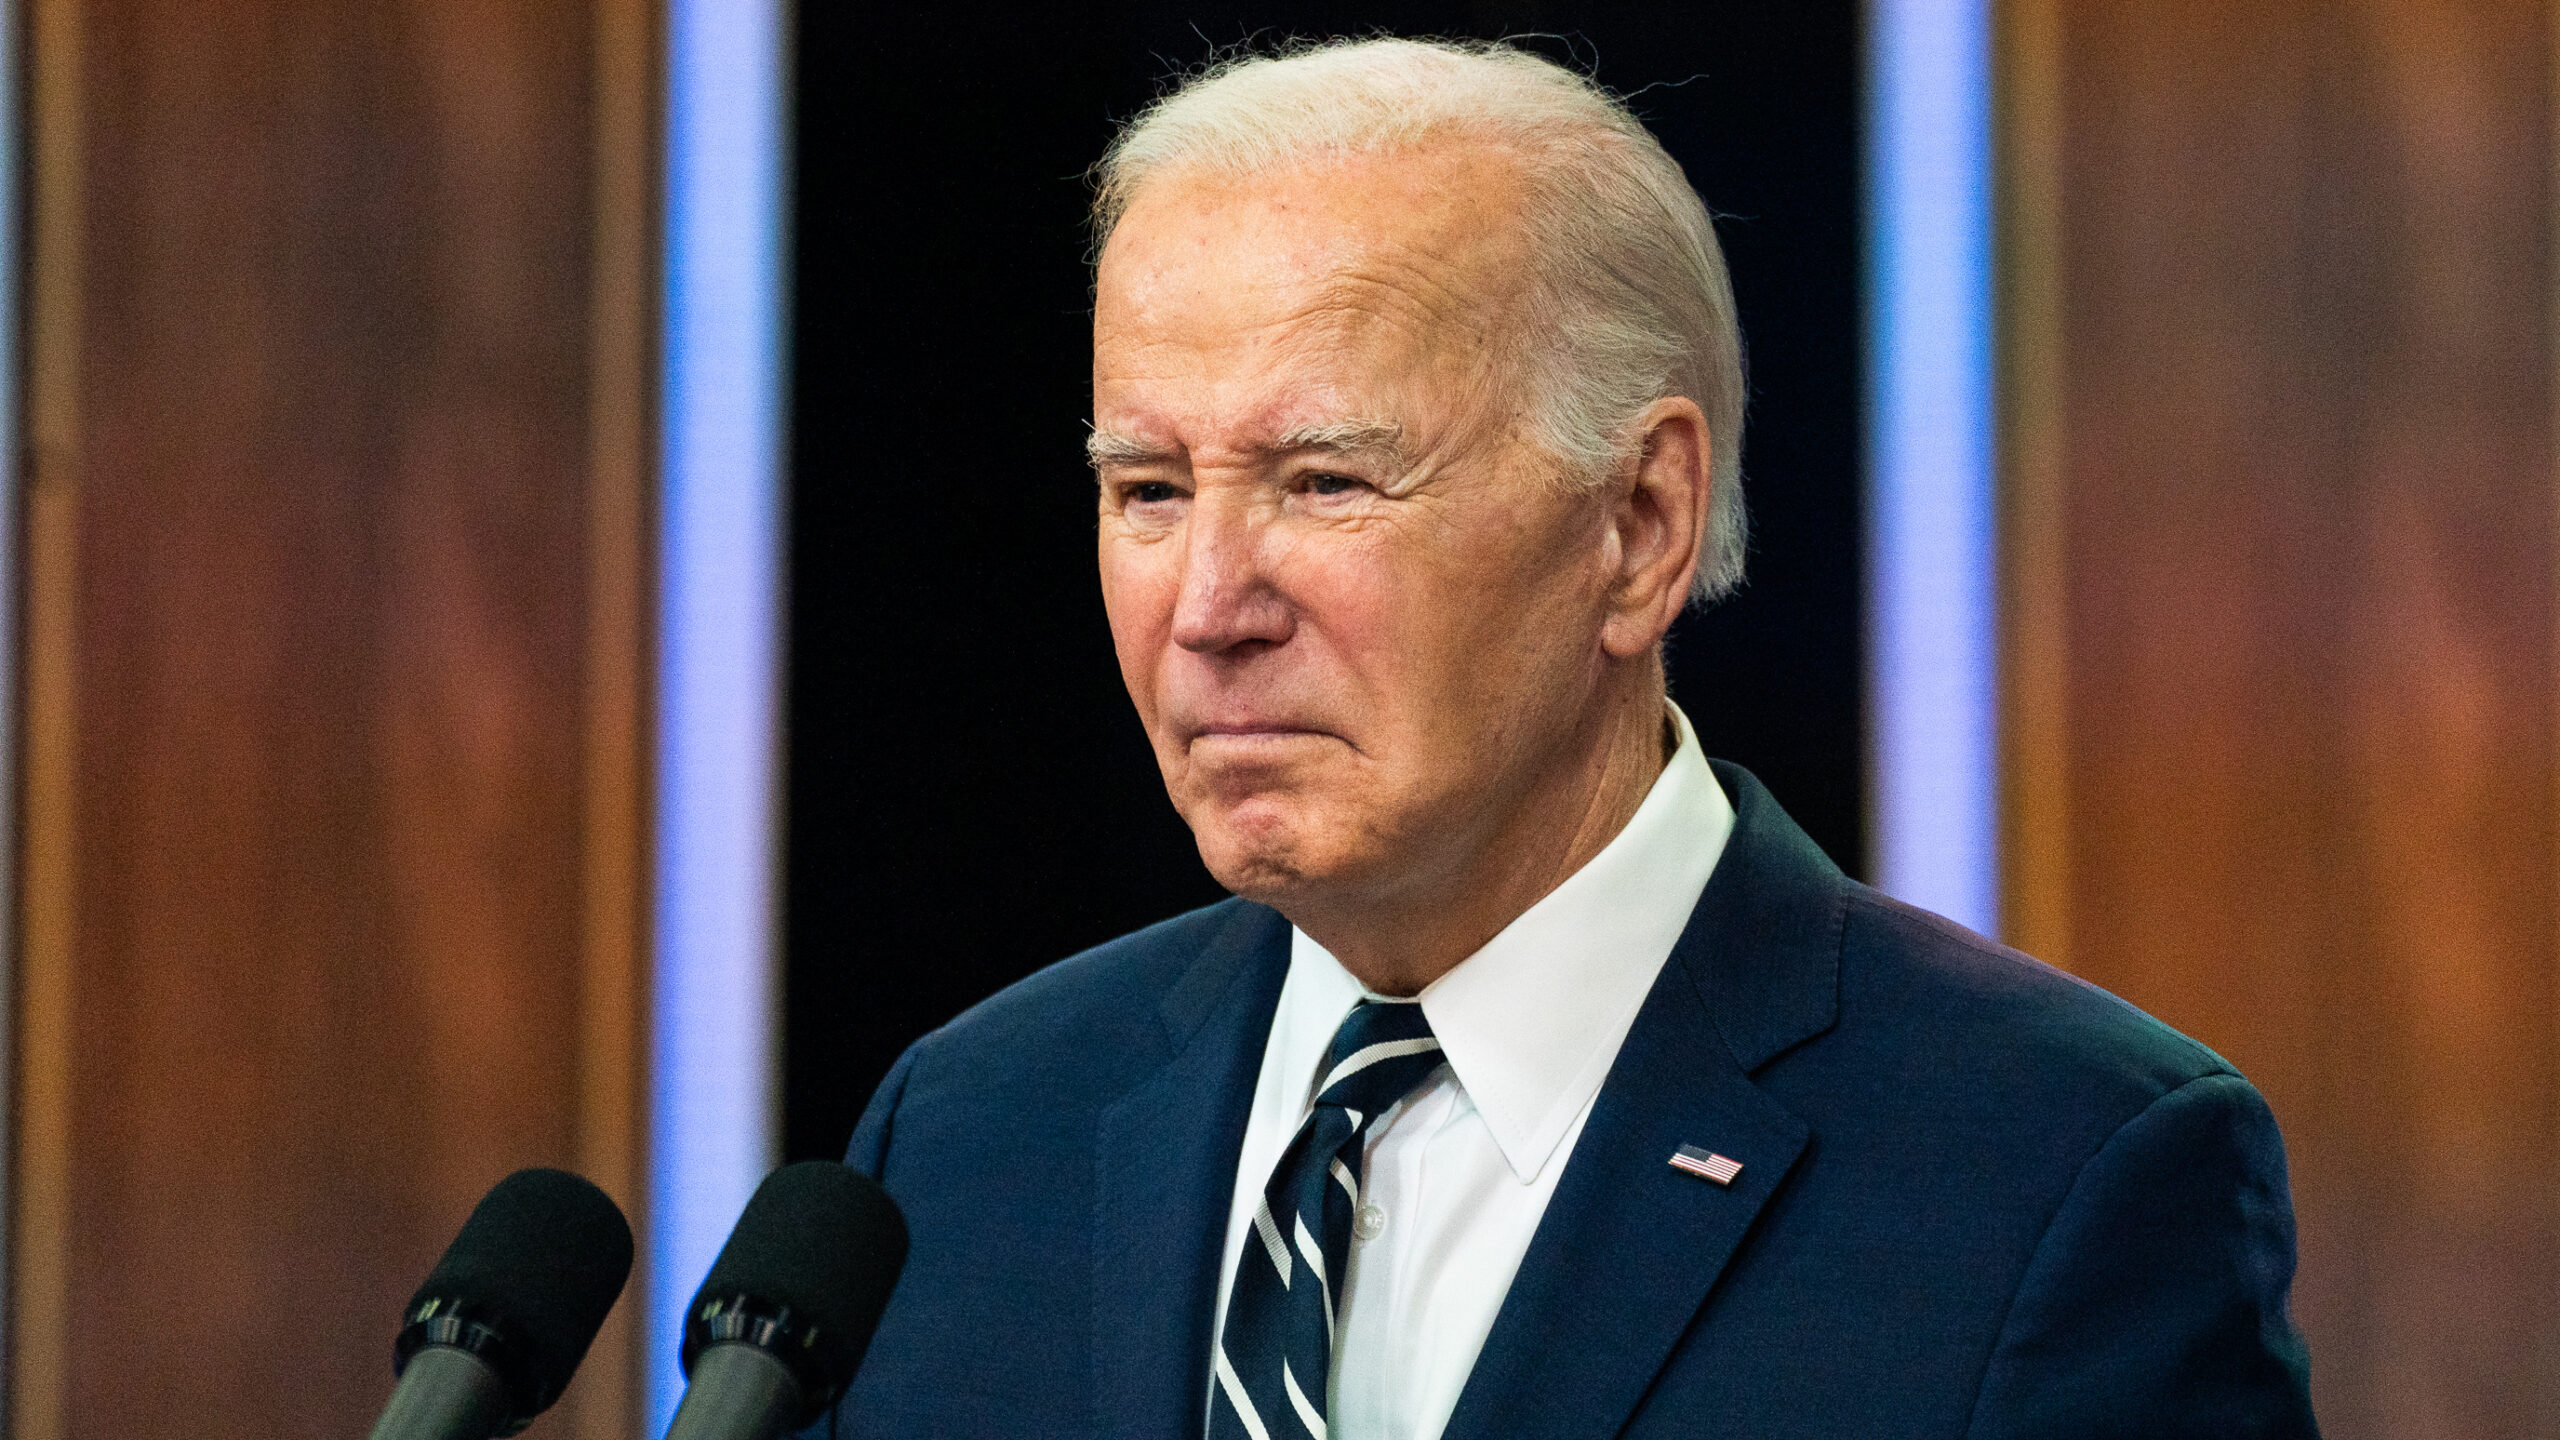 Report: Biden Administration Delays Aid to Israel Without Congressional Notification